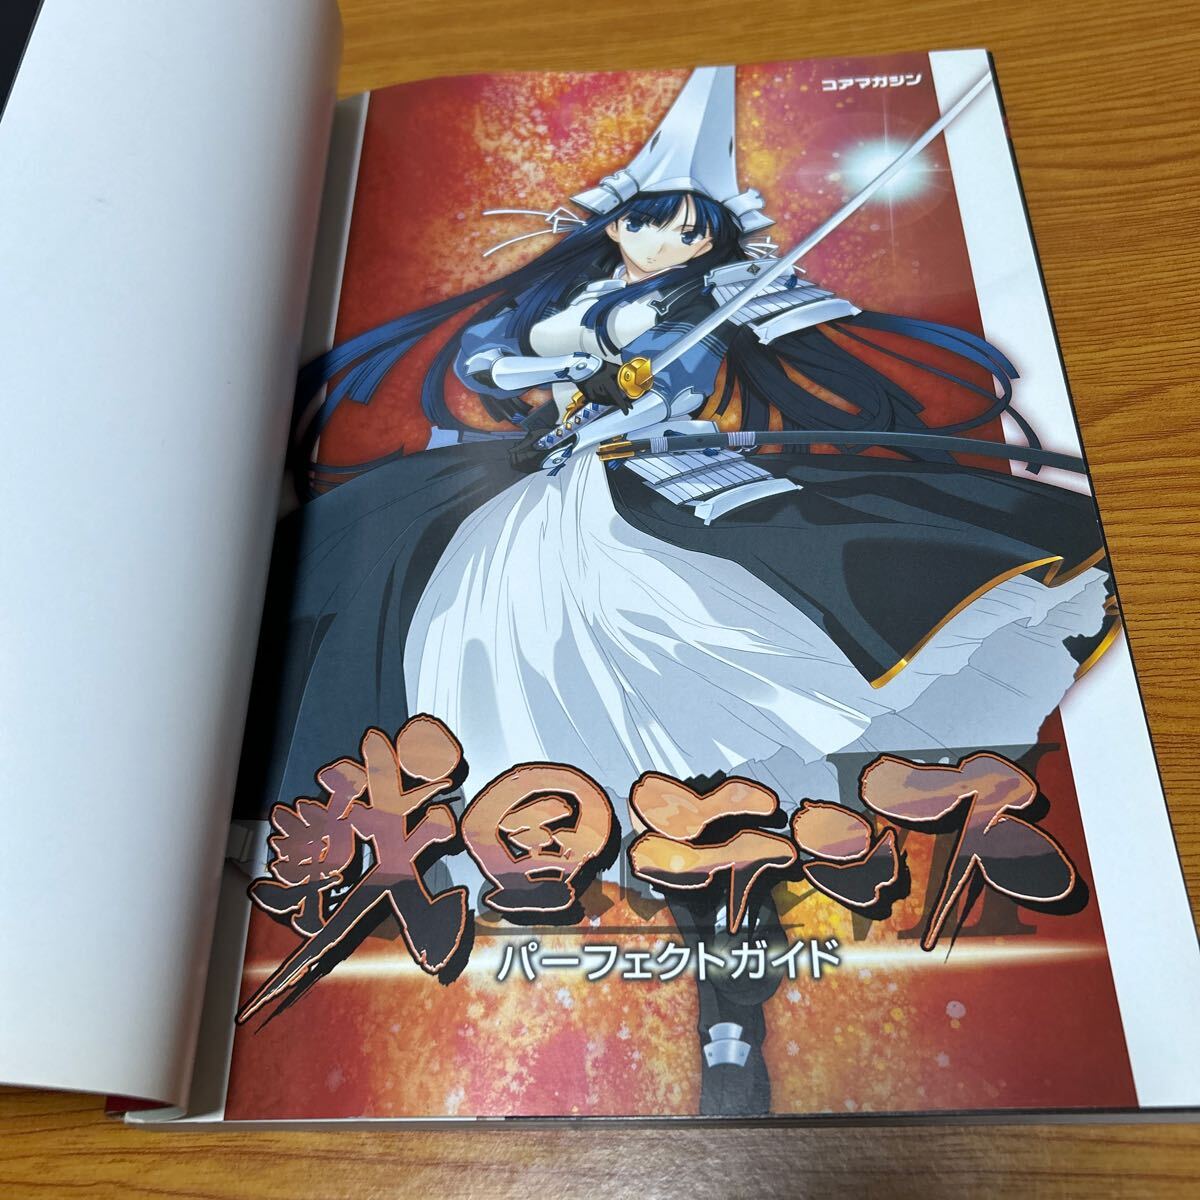  Sengoku Ran s Perfect guide Alice soft official 2007 year the first version Coremagazine 